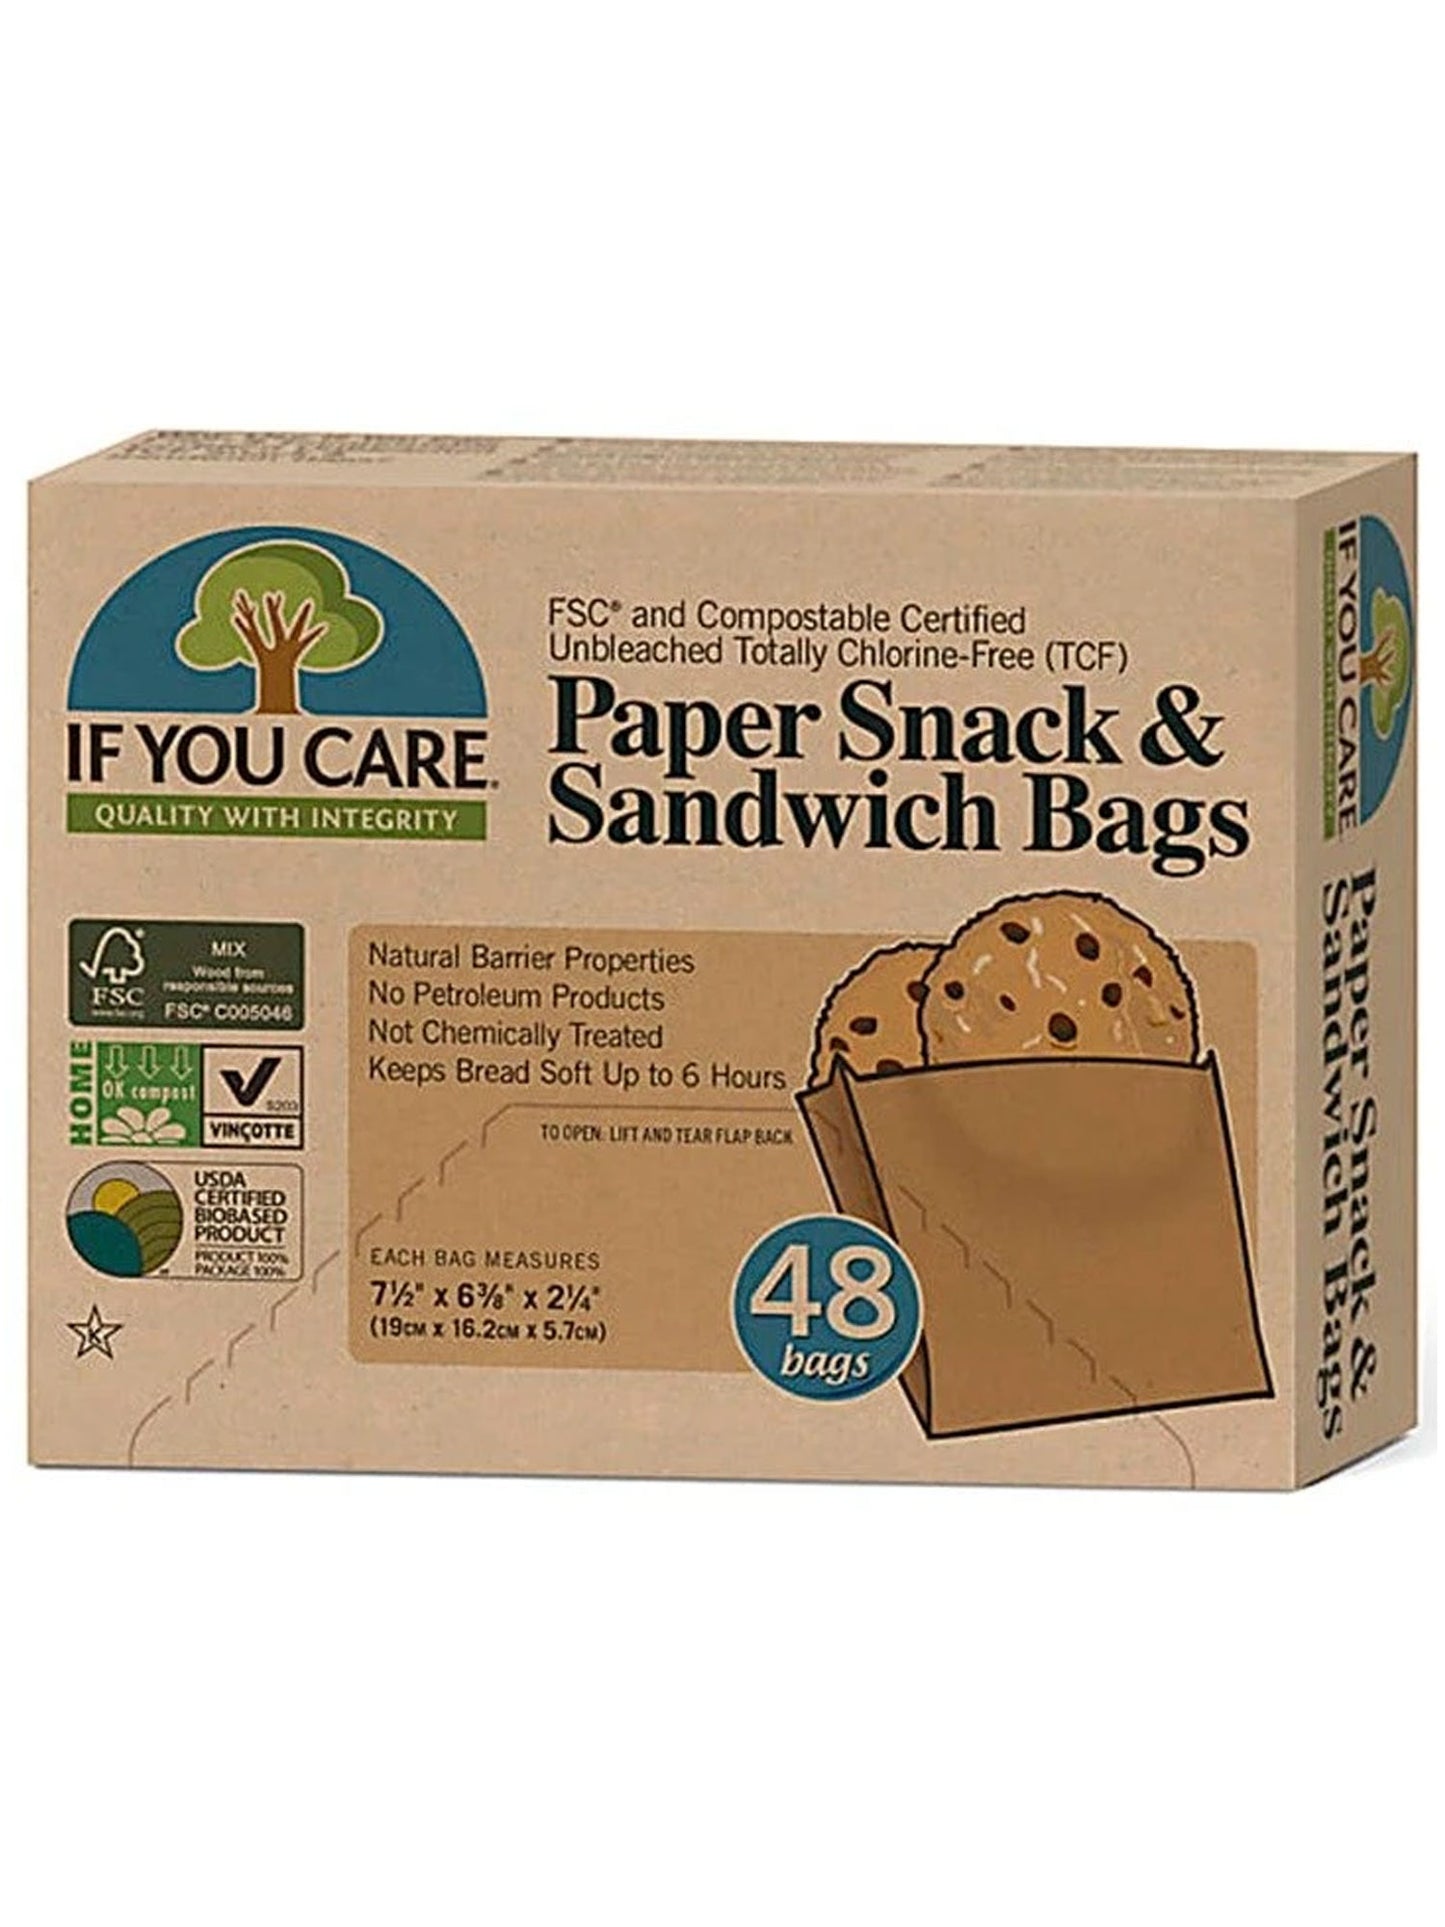 If You Care Sandwich Bags 48 Bags